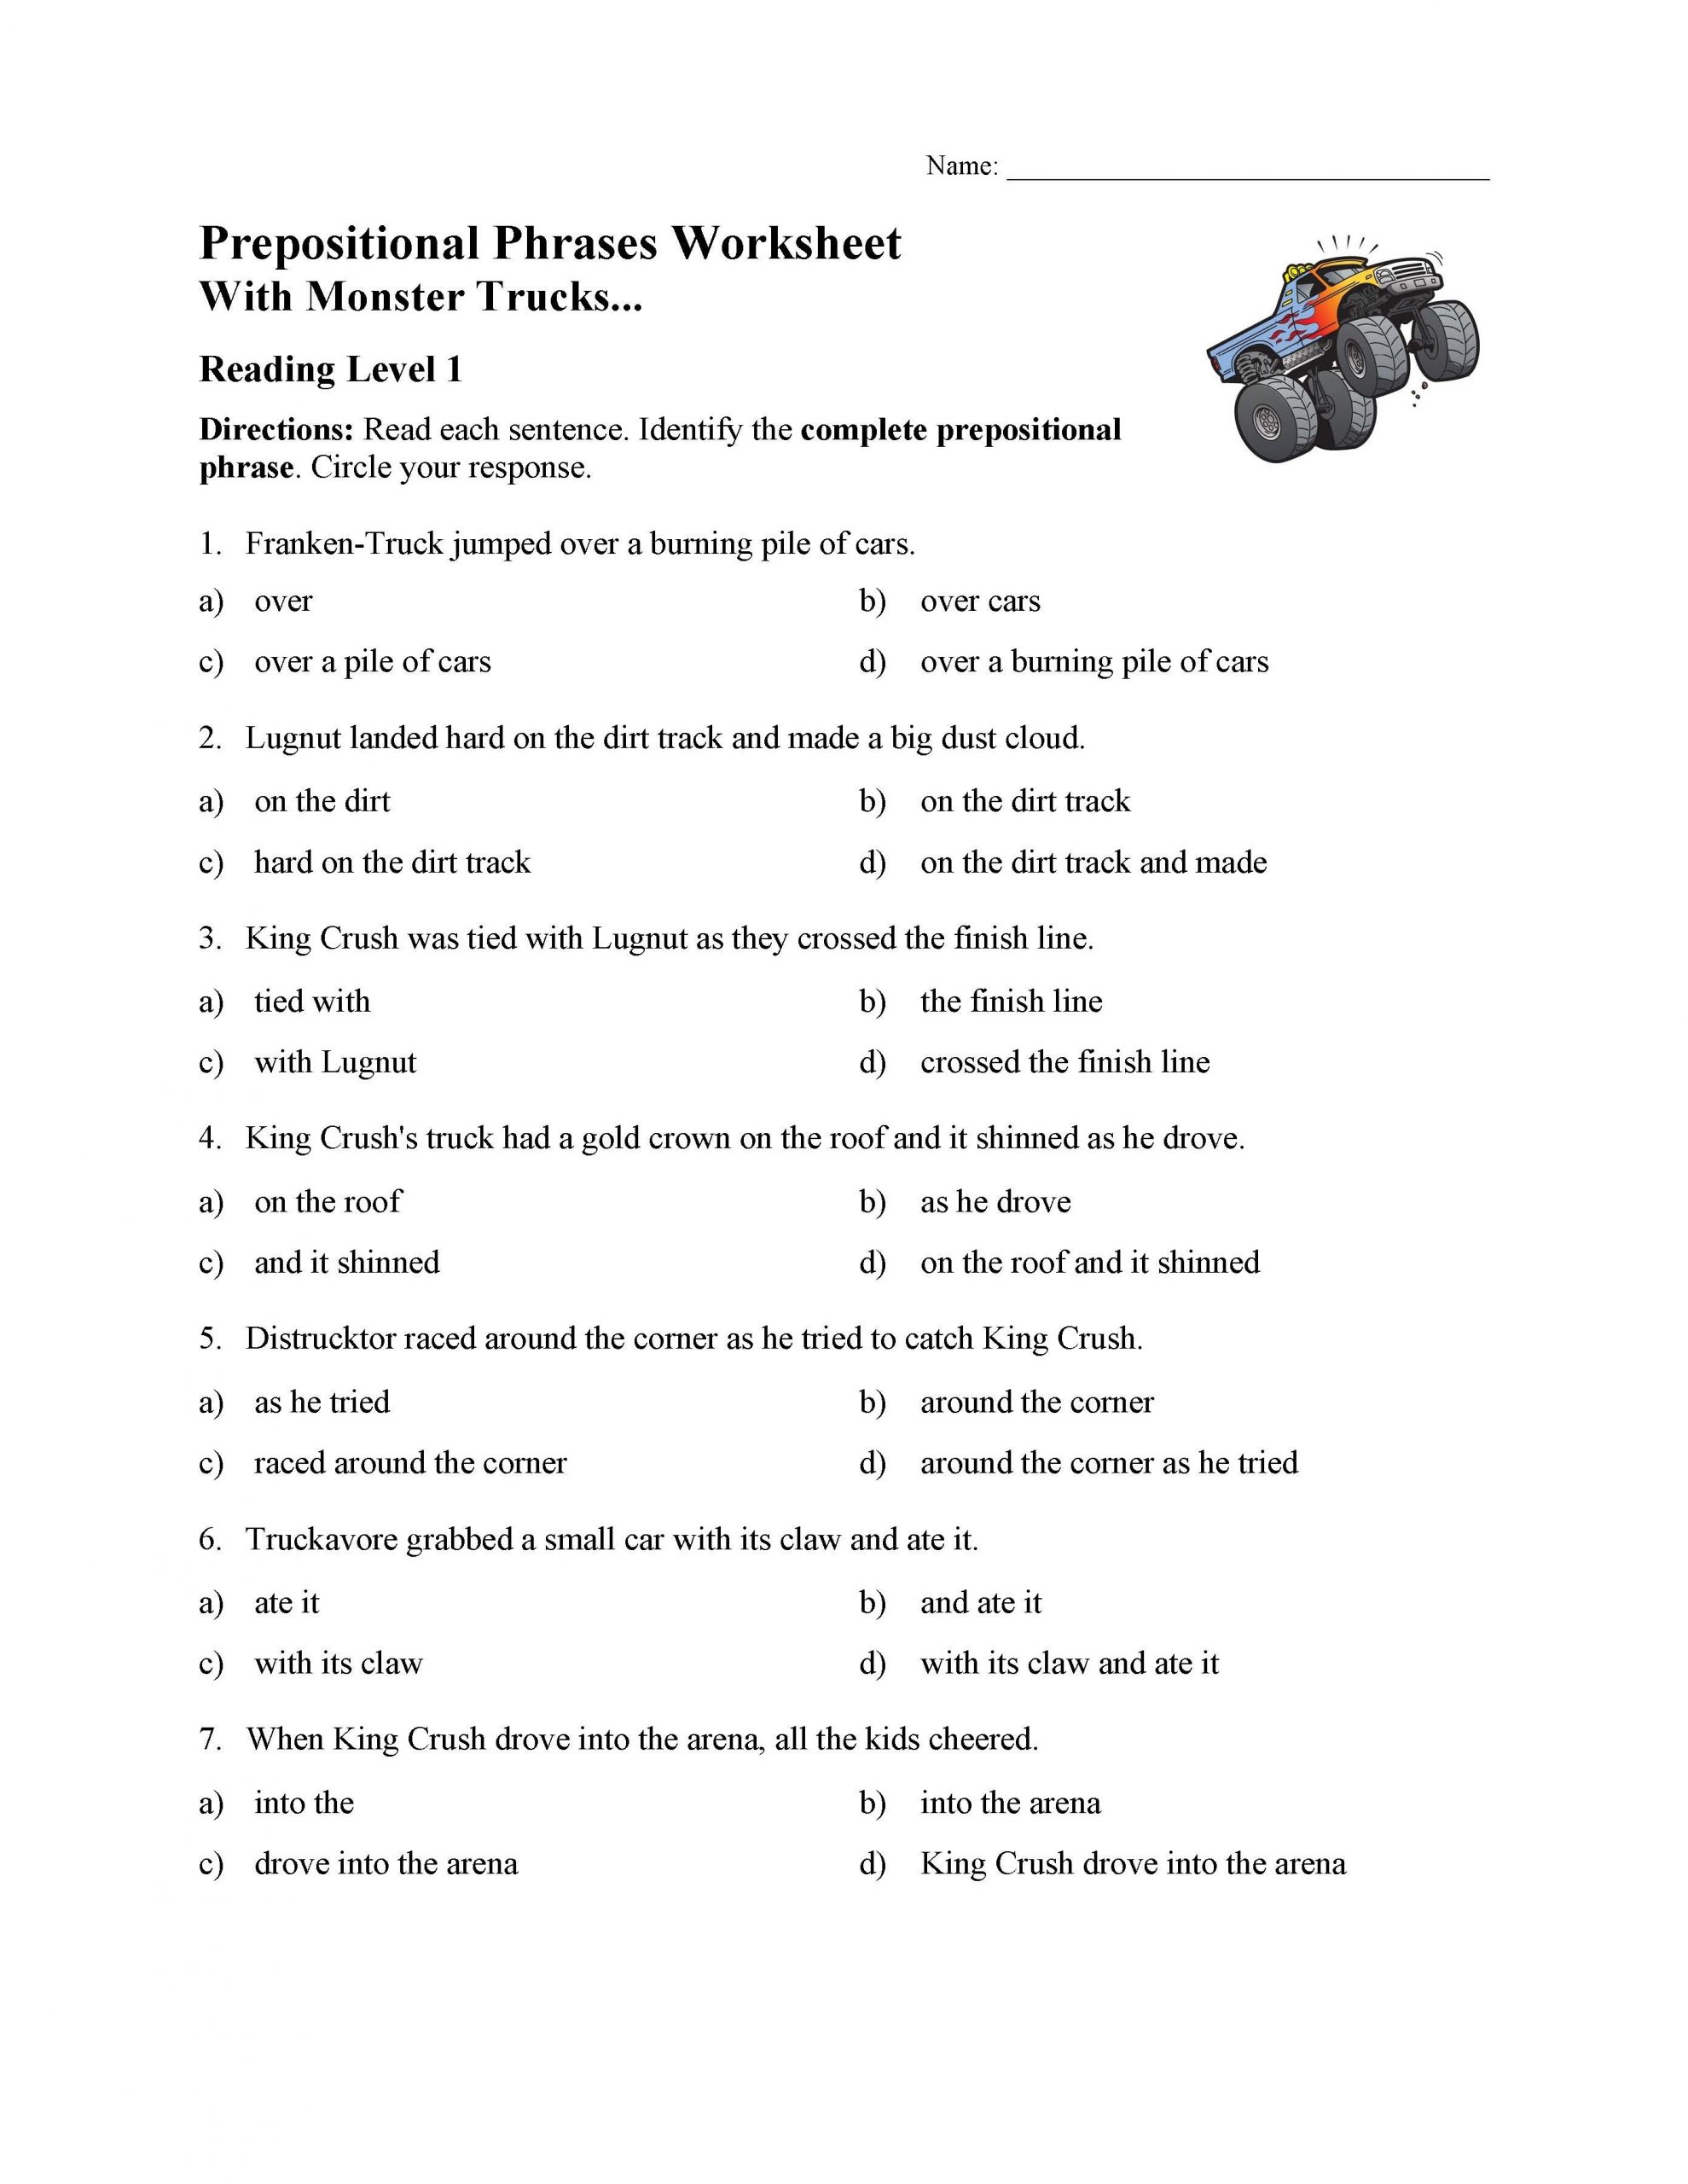 Prepositional Phrase Worksheet with Answers Prepositional Phrases Worksheet 1 Reading Level 1